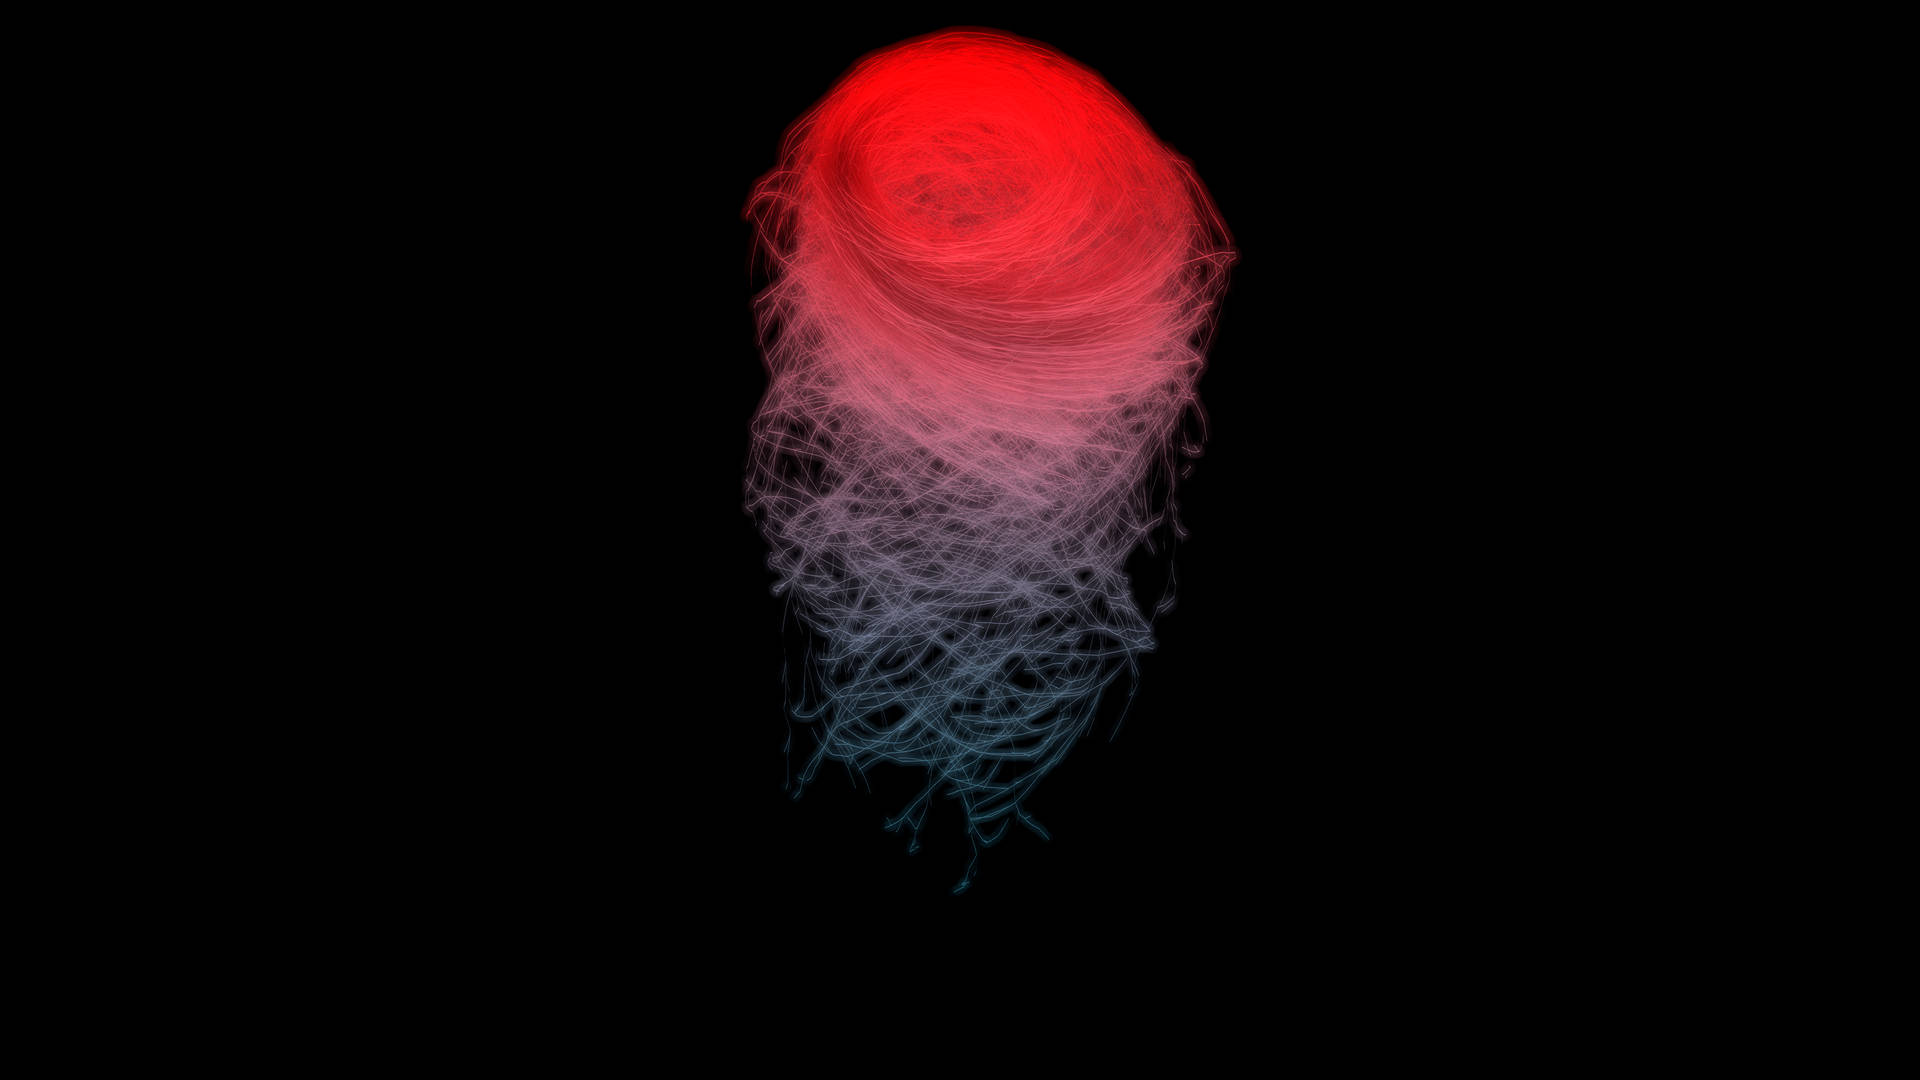 Red And White Spiral In Black Background